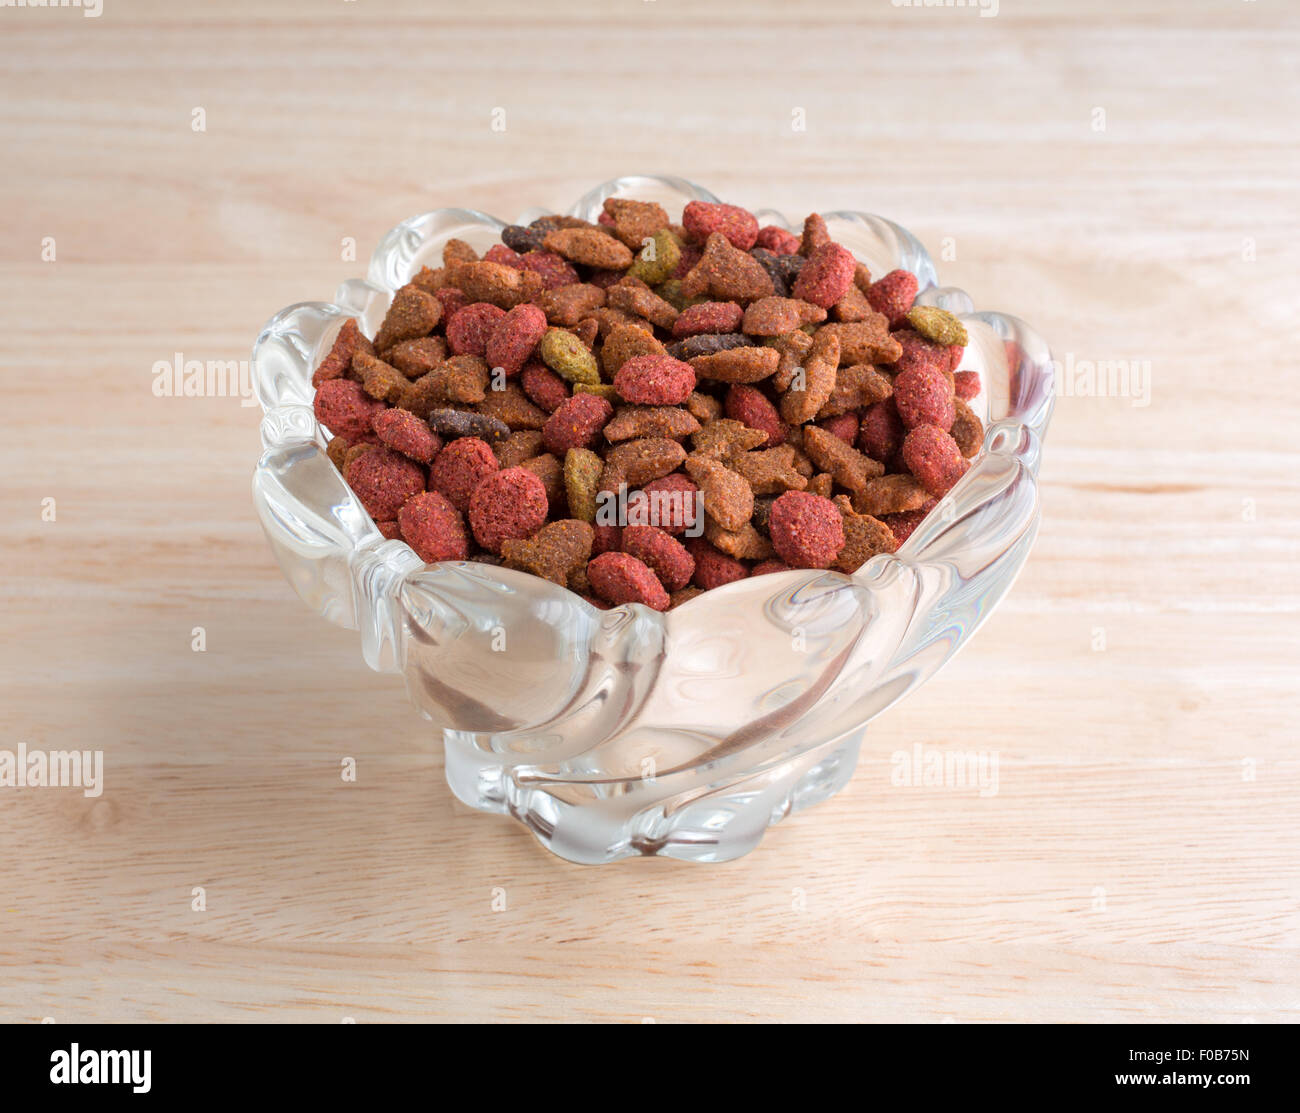 A decorative glass bowl filled with generic dry cat food on a wood counter  top Stock Photo - Alamy